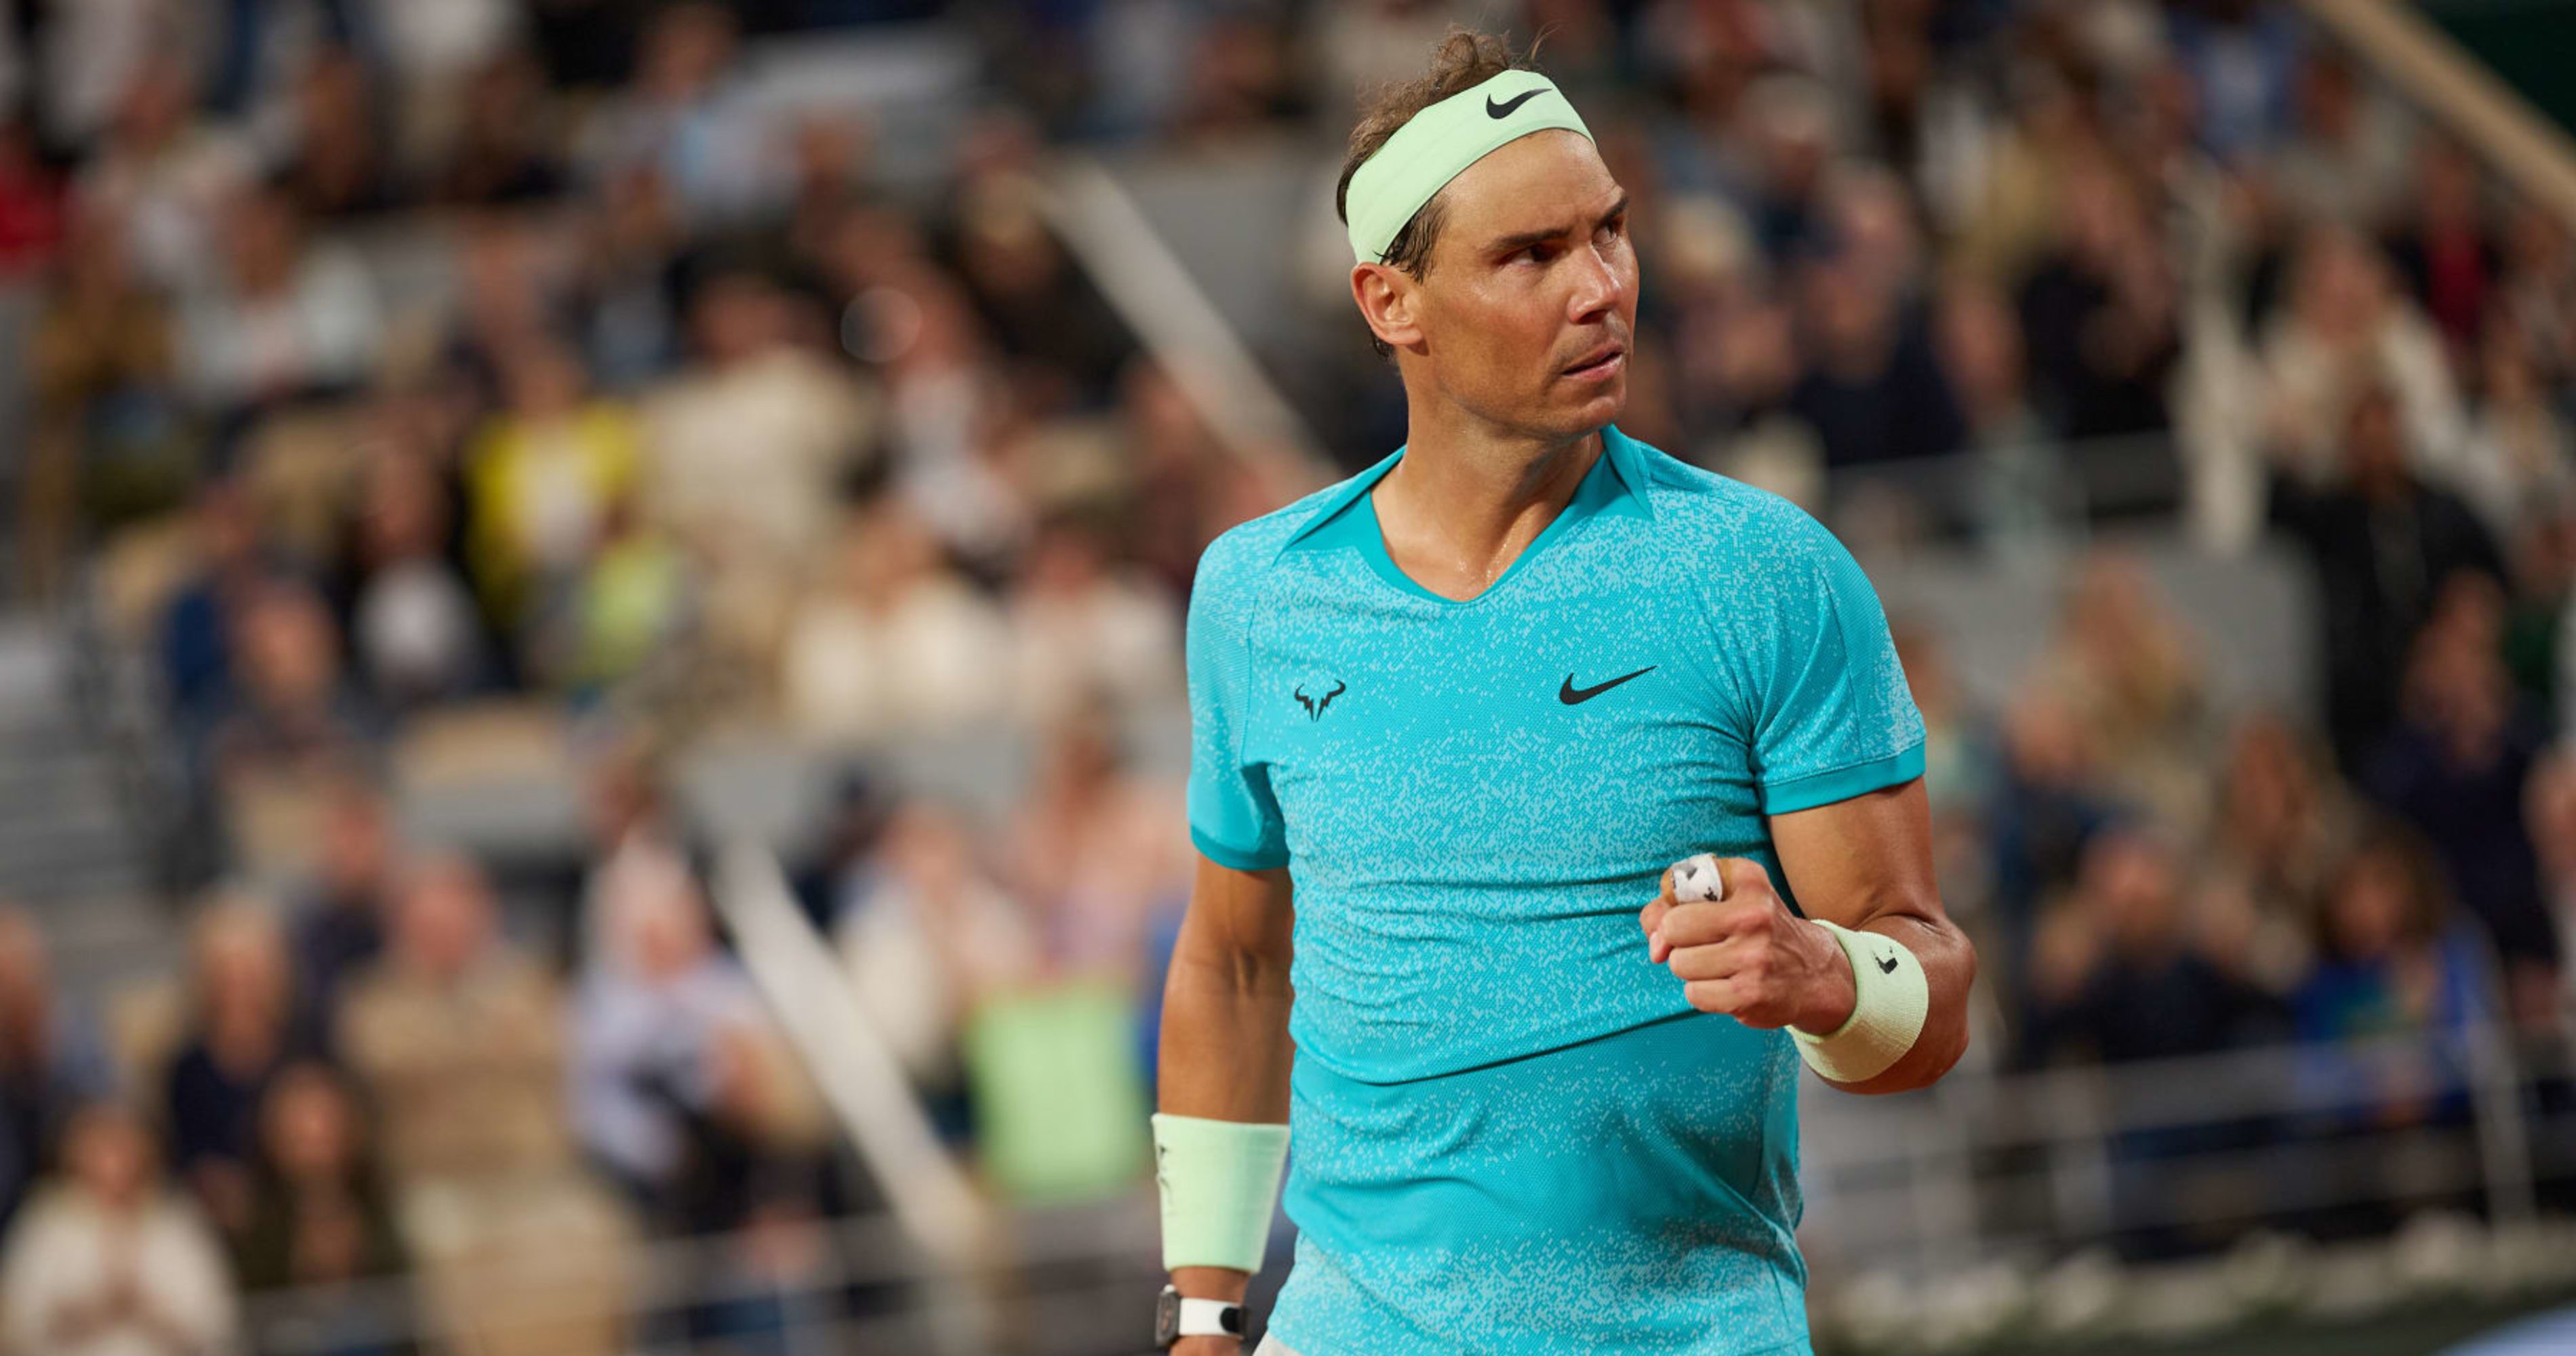 Rafael Nadal to Play for Spain at Olympics, Will Team with Carlos Alcaraz in Doubles